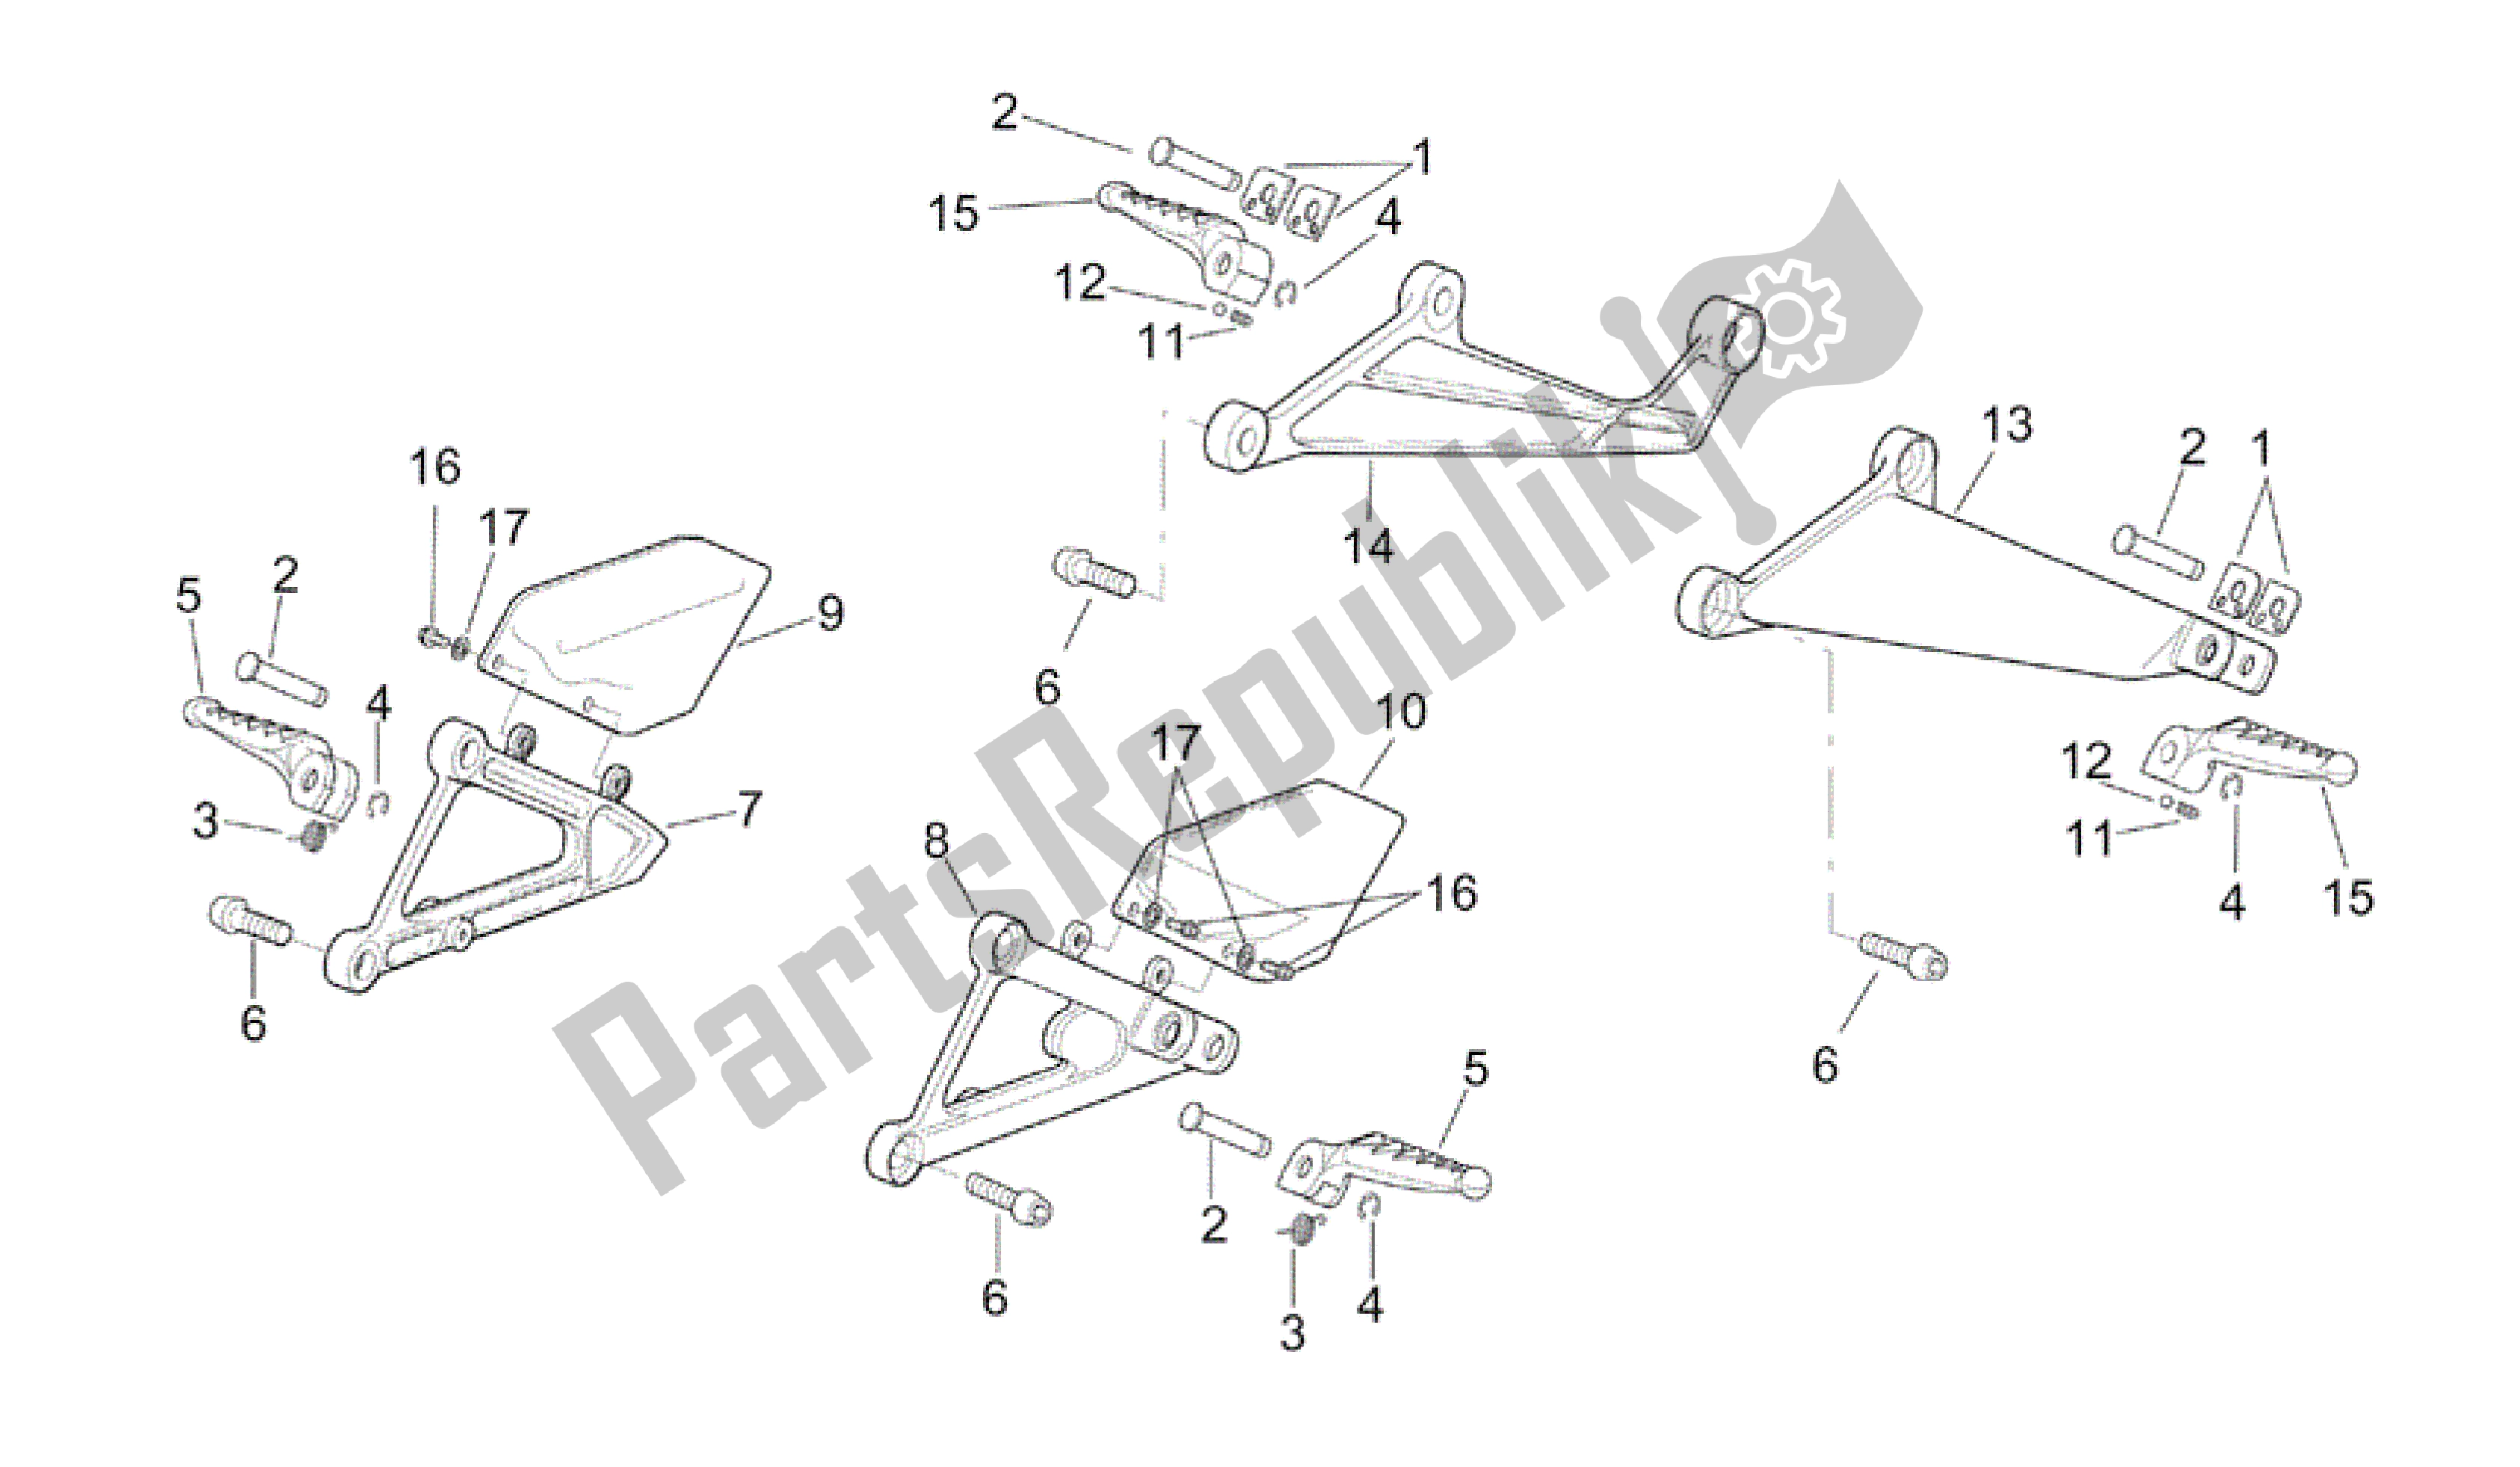 All parts for the Foot Rests of the Aprilia RSV Tuono R 3952 1000 2002 - 2003